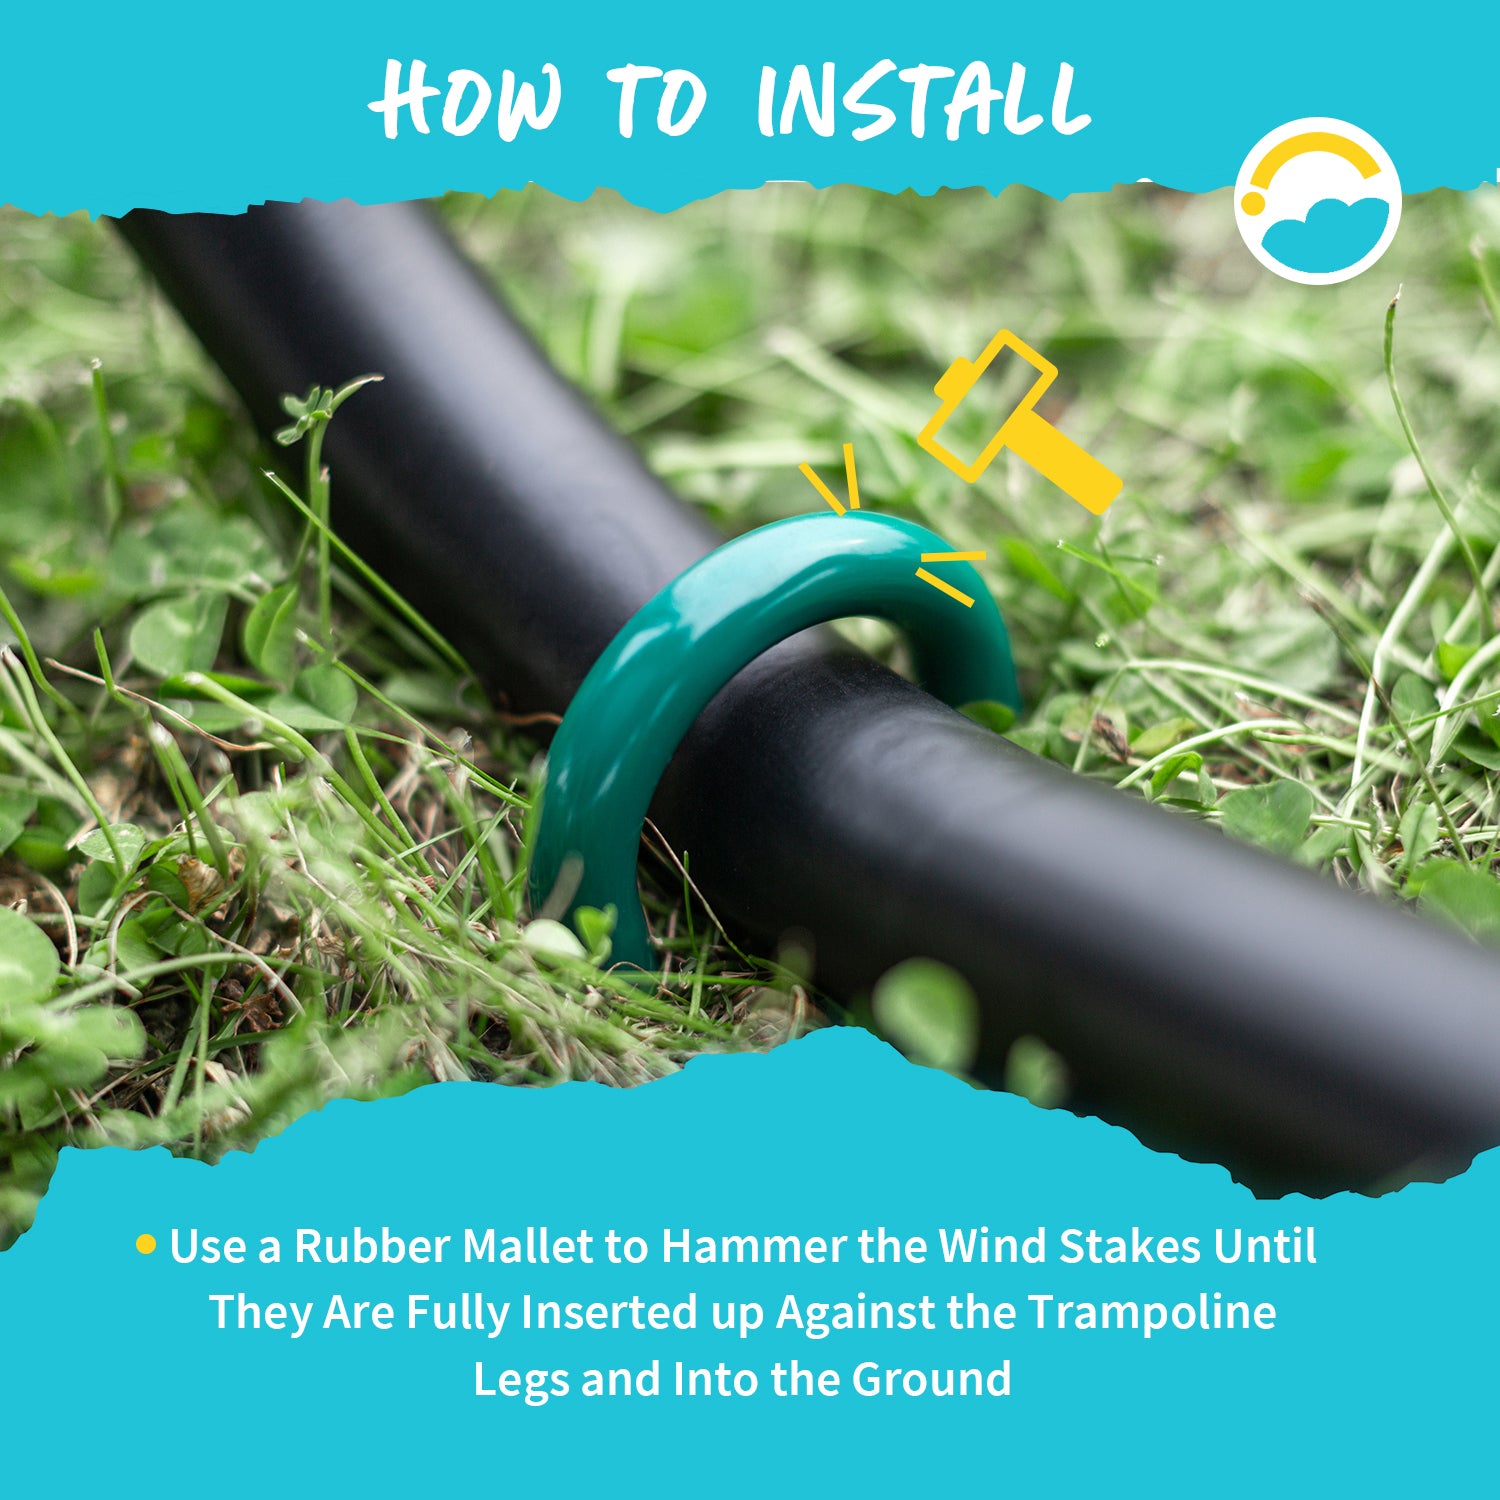 How to Install: Use a Rubber Mallet to Hammer the Wind Stakes Until They are Fully Inserted up Against the Trampoline Legs and Into the Ground.